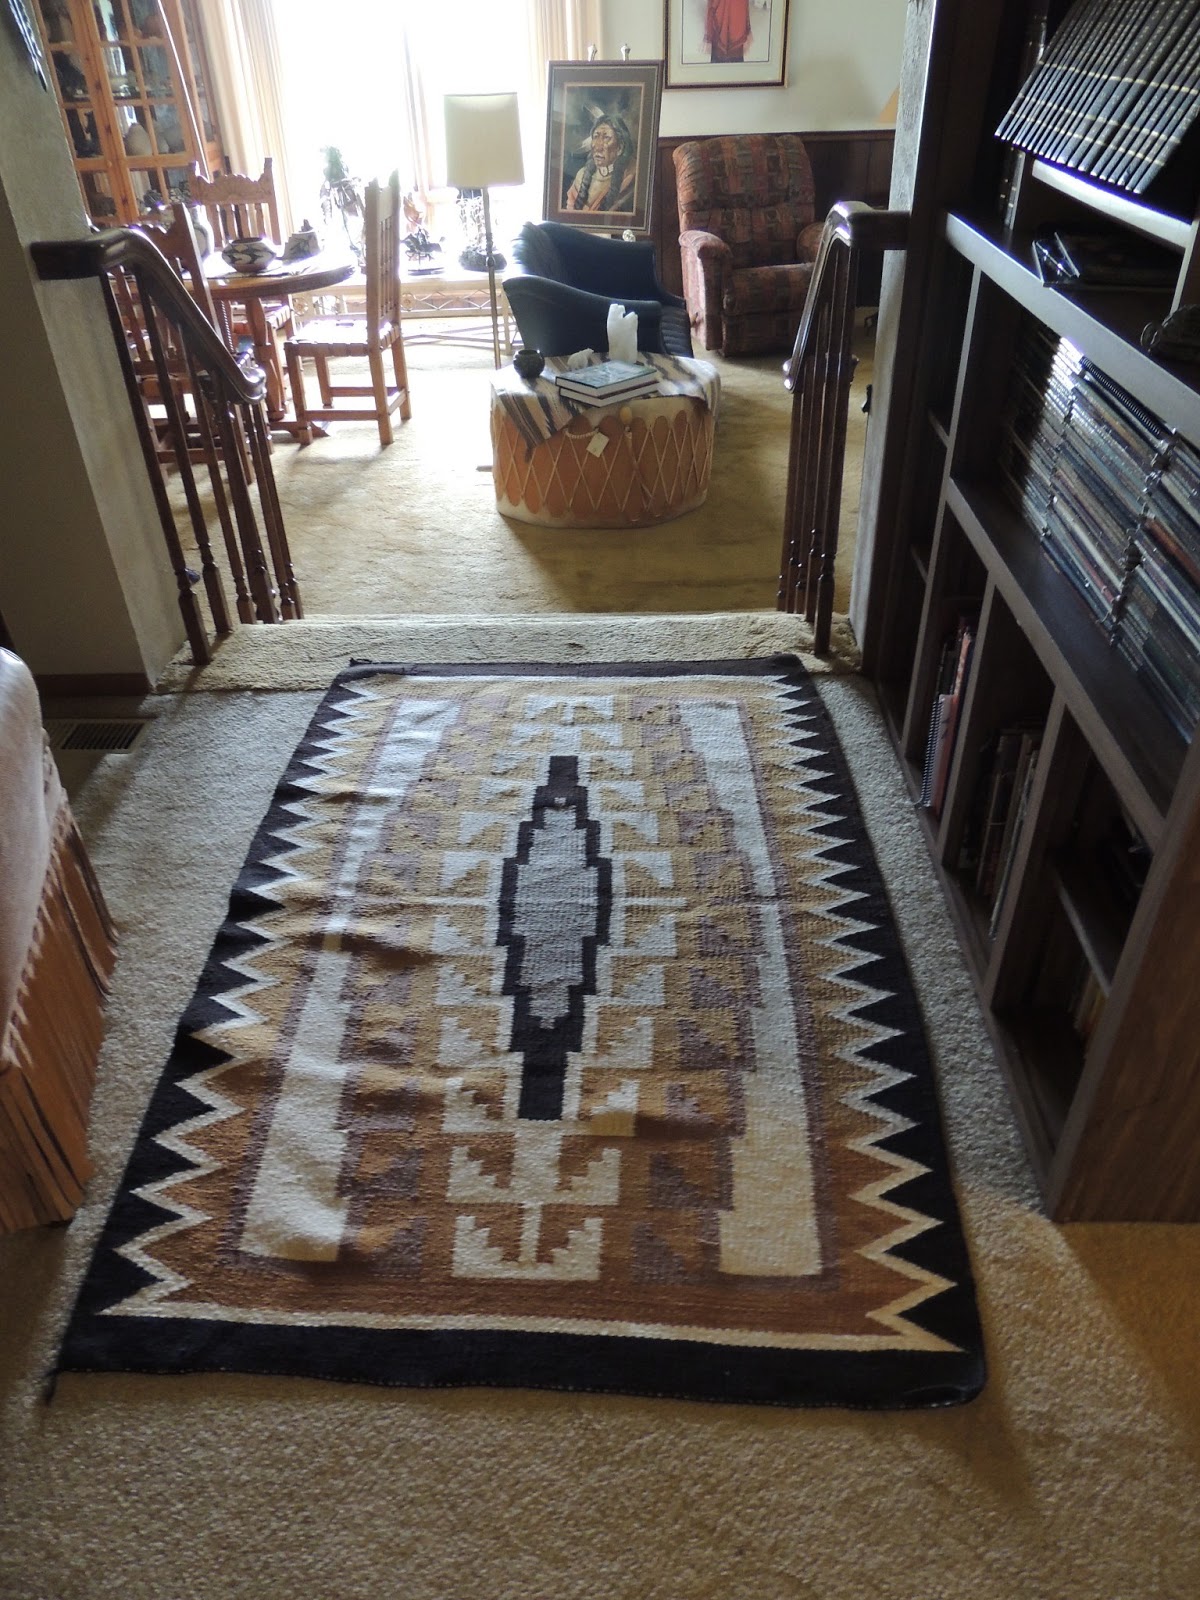 How to take care of a Navajo Rug